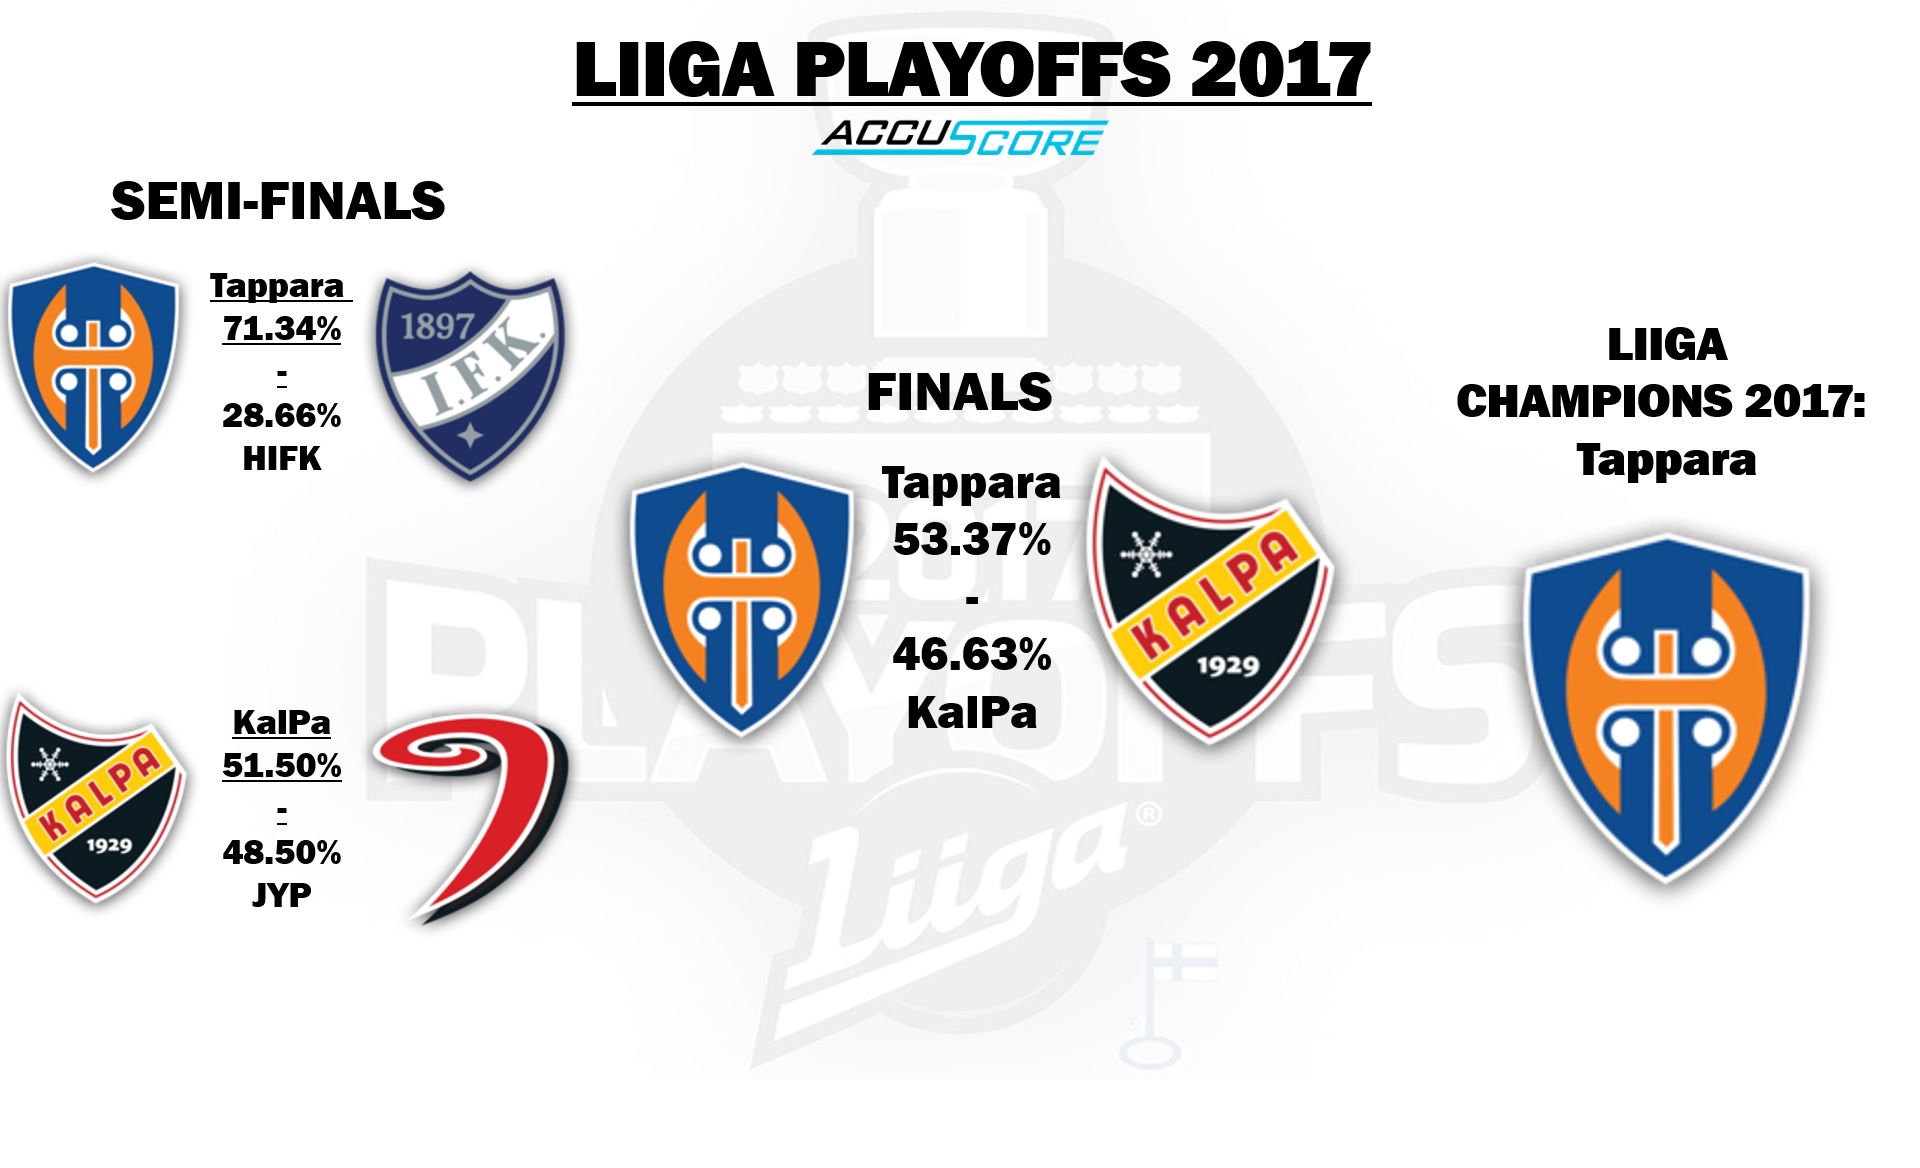 Accuscore's bracket and predictions for Liiga Playoffs 2016/17 - Semi-Finals